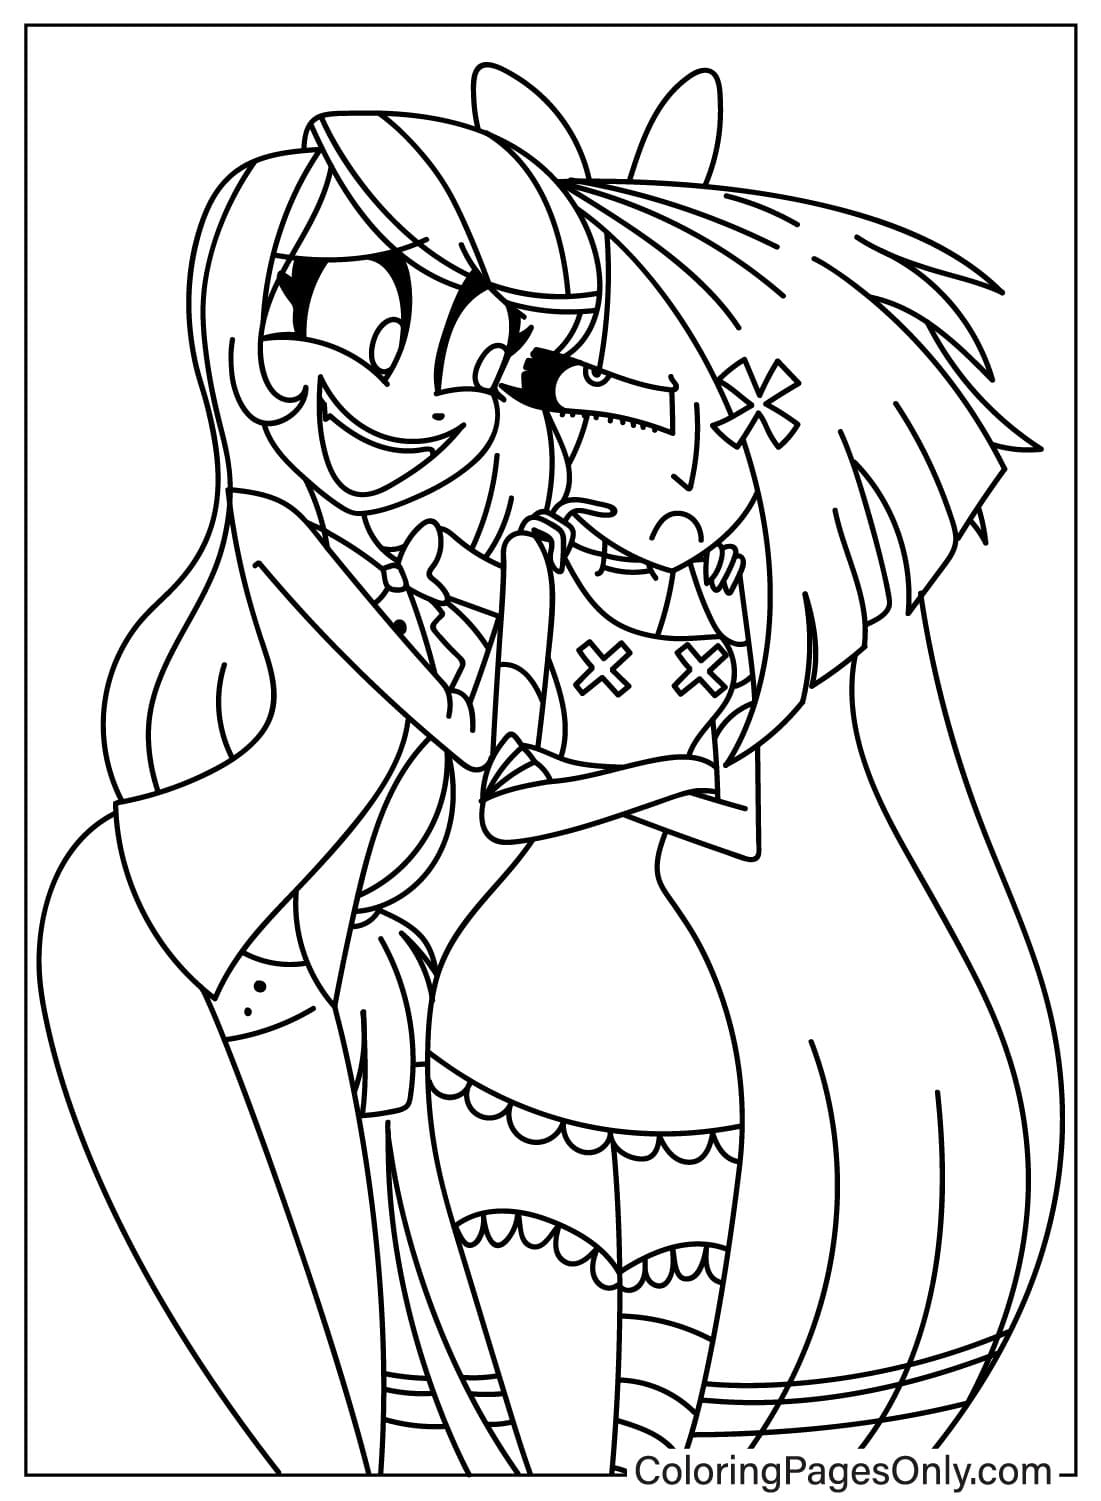 Charlie and Vaggie Coloring Page from Hazbin Hotel